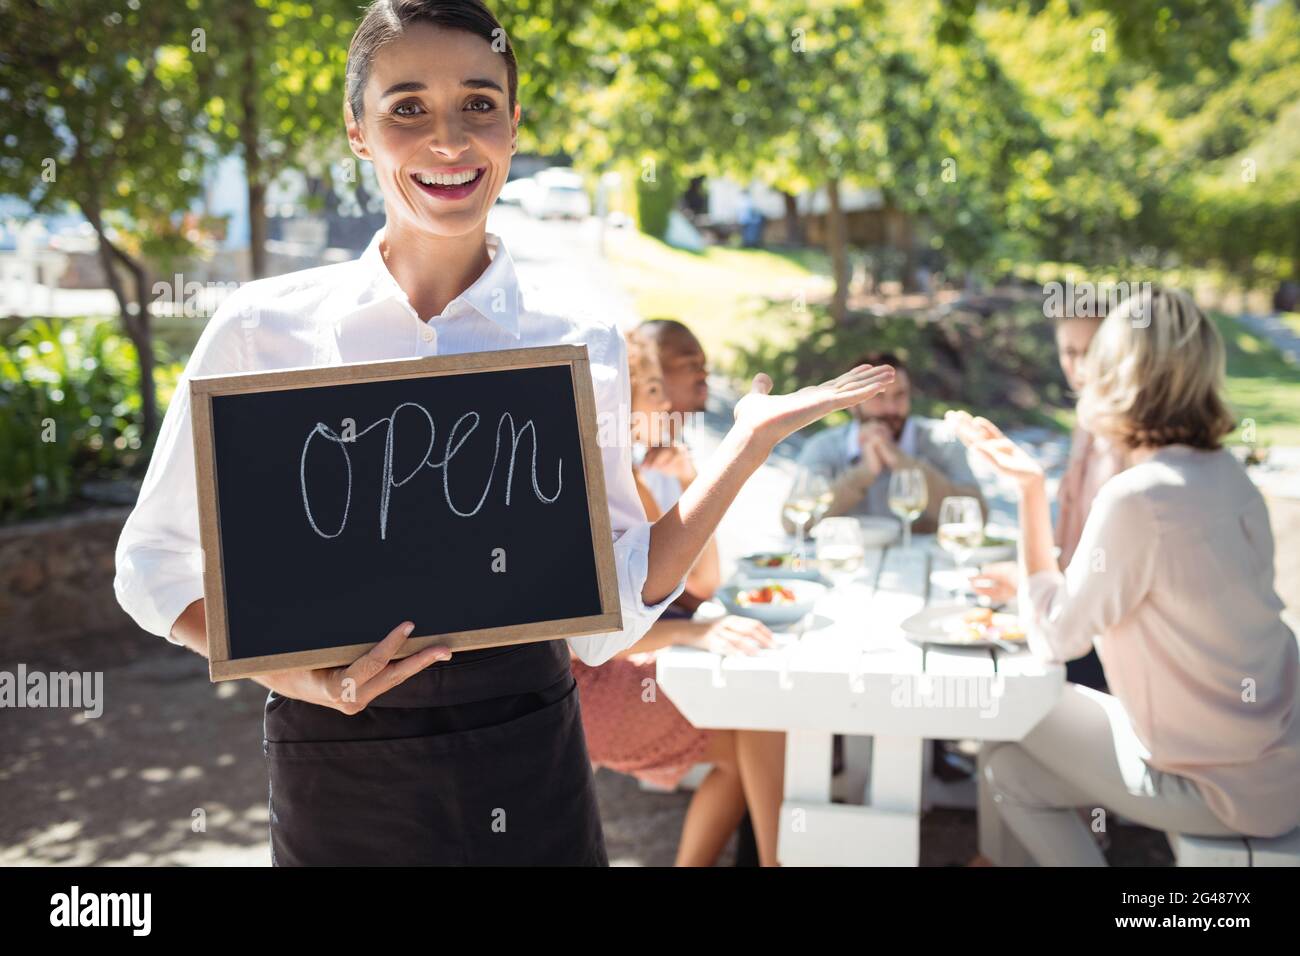 Smiling waitress standing with open sign board Stock Photo